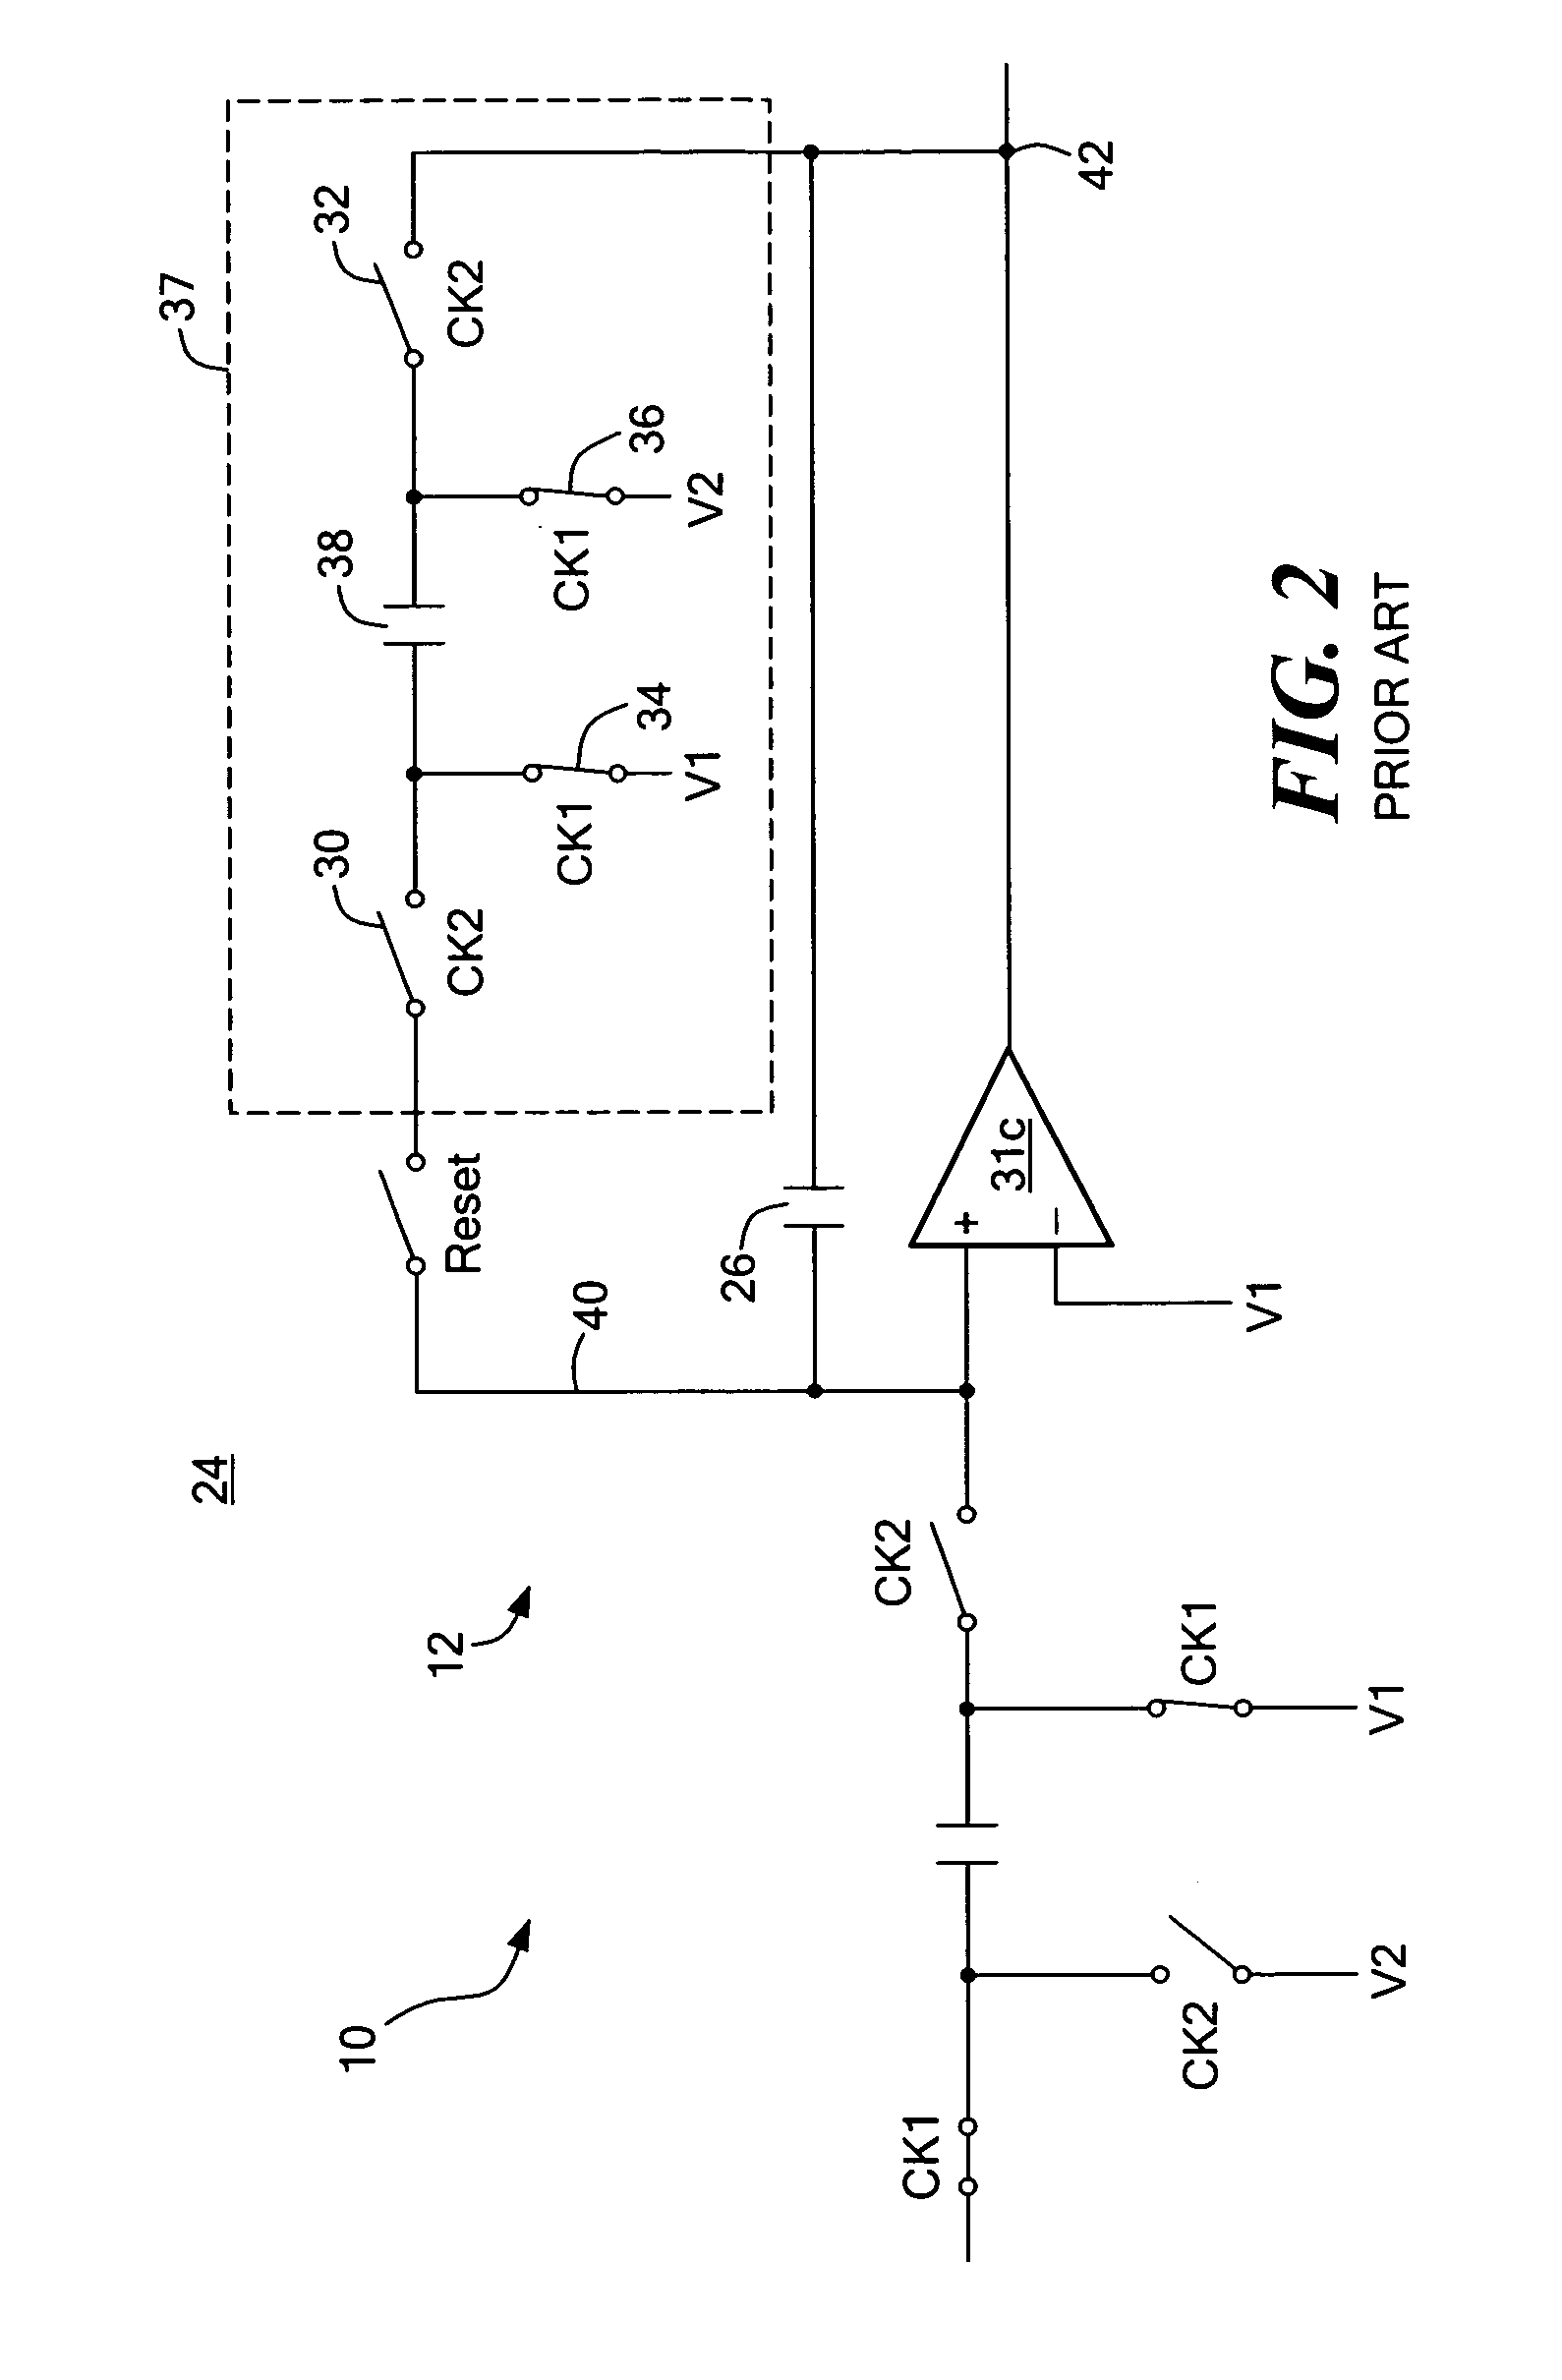 Apparatus and method for controlling the state variable of an integrator stage in a modulator